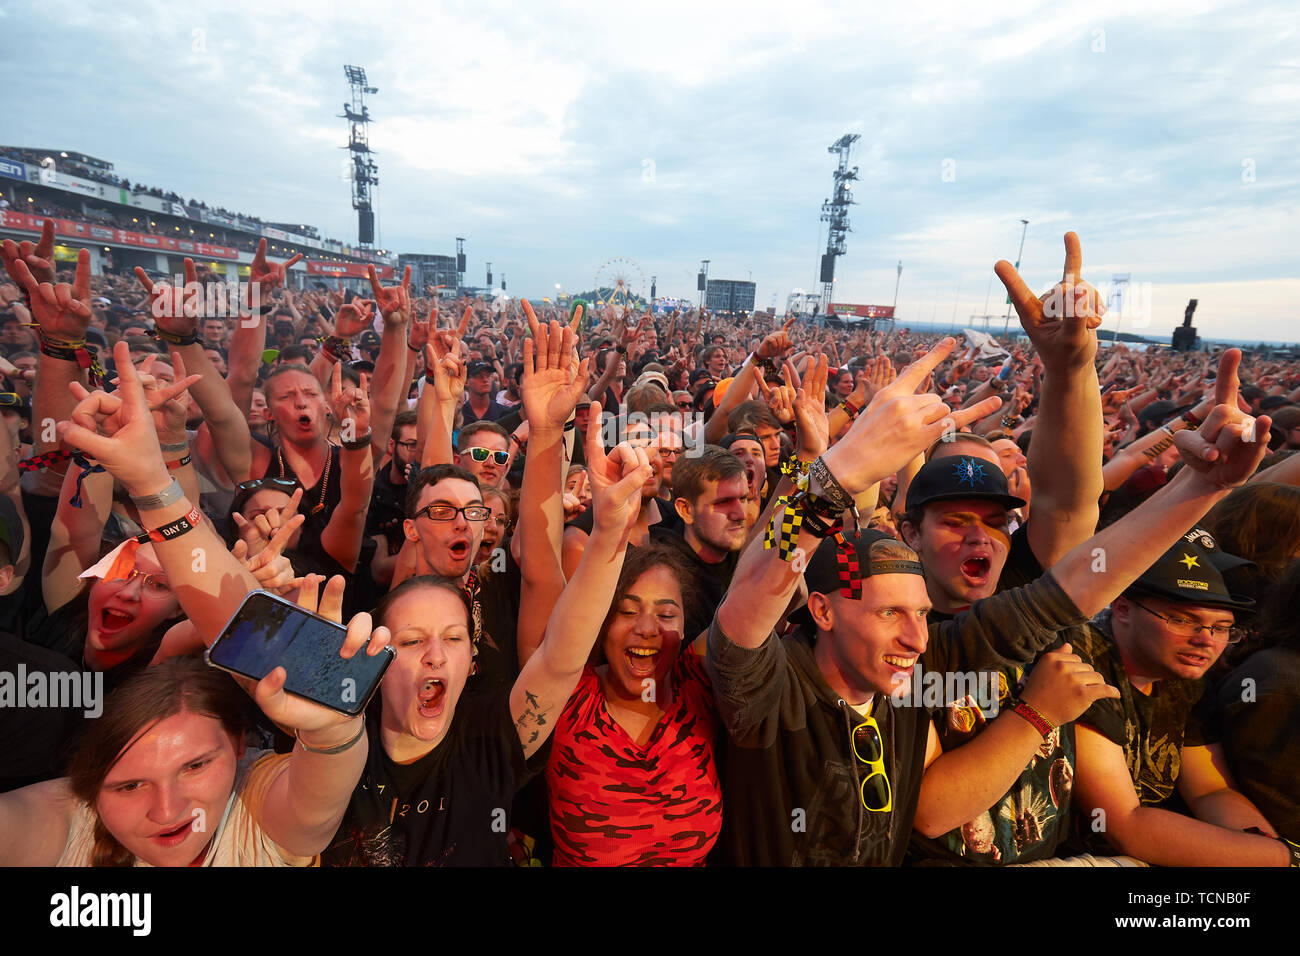 09 June 2019, Rhineland-Palatinate, Nürburg: Rock fans cheer in front of  the main stage of the open-air festival "Rock am Ring" during the  performance of the rock band "Tenacious D". On three